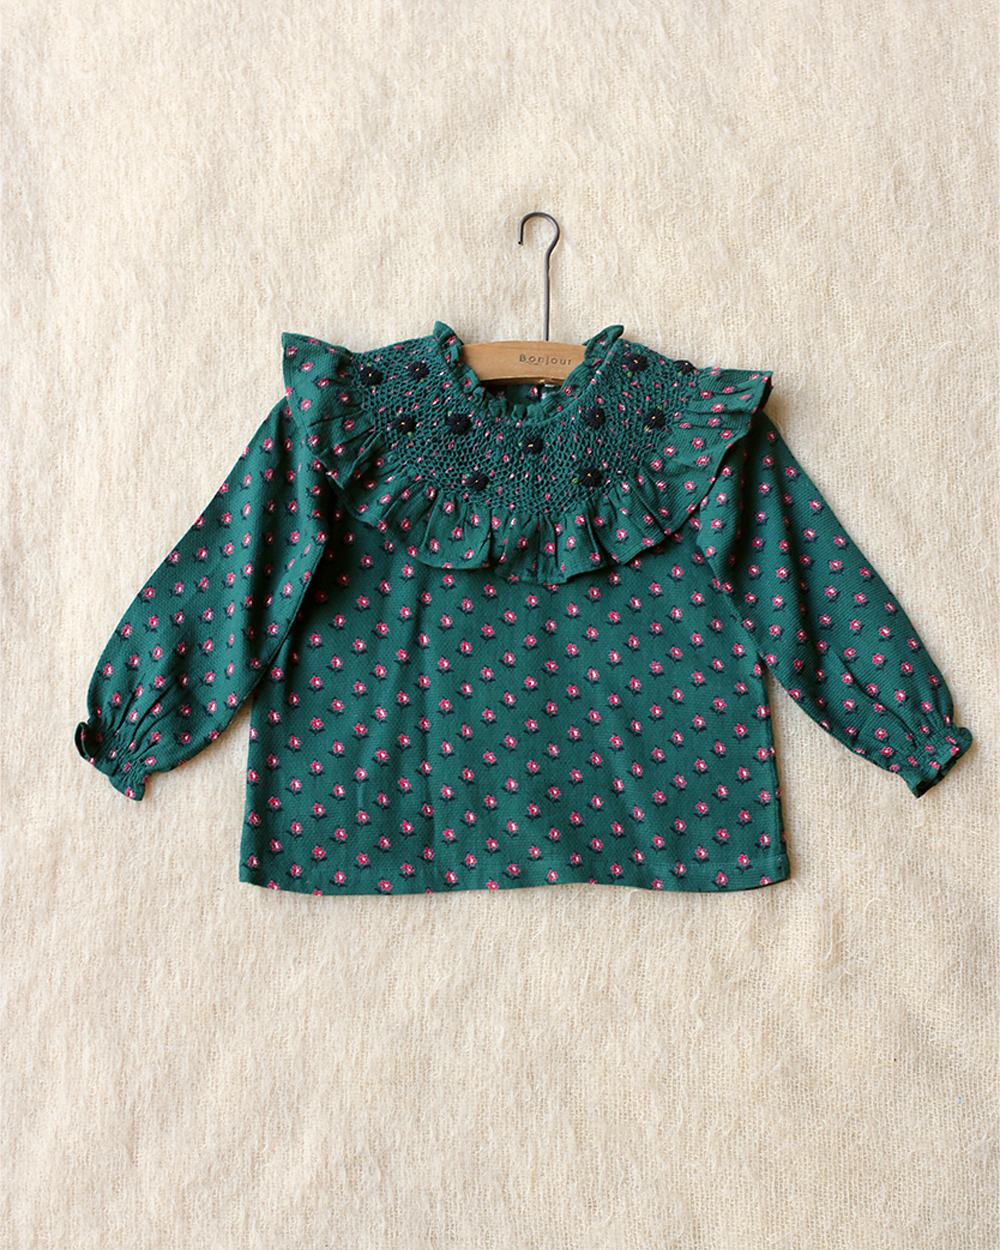 [ BONJOUR ] BLOUSE WITH HANDSMOCK COLLAR / Provencal print [6Y]